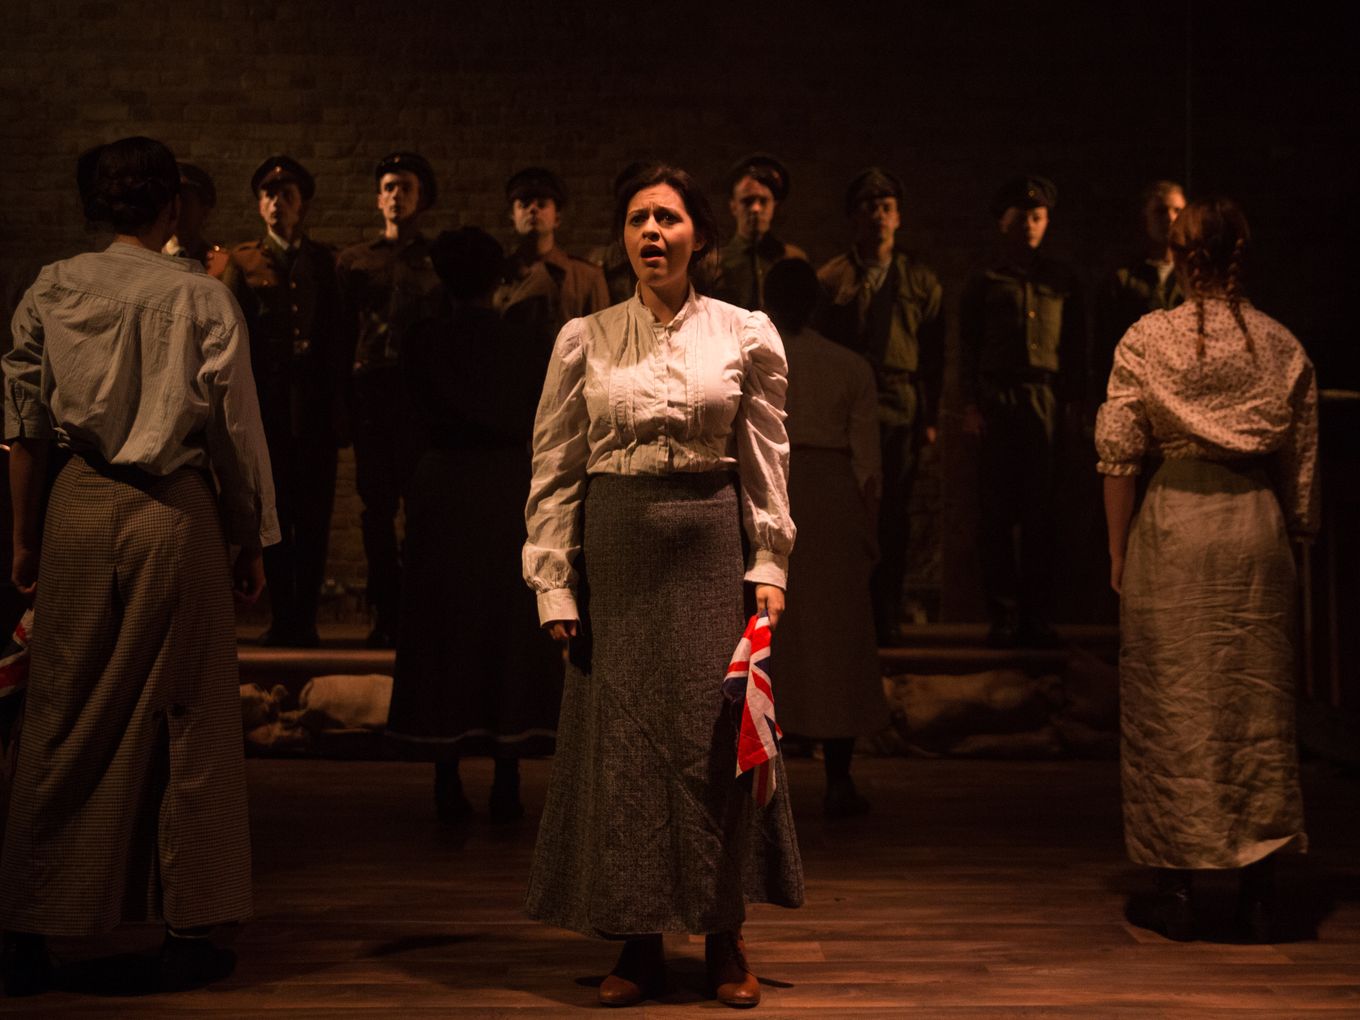 A distressed woman holding a Union Jack is spotlit onstage surrounded by other actors in shadow